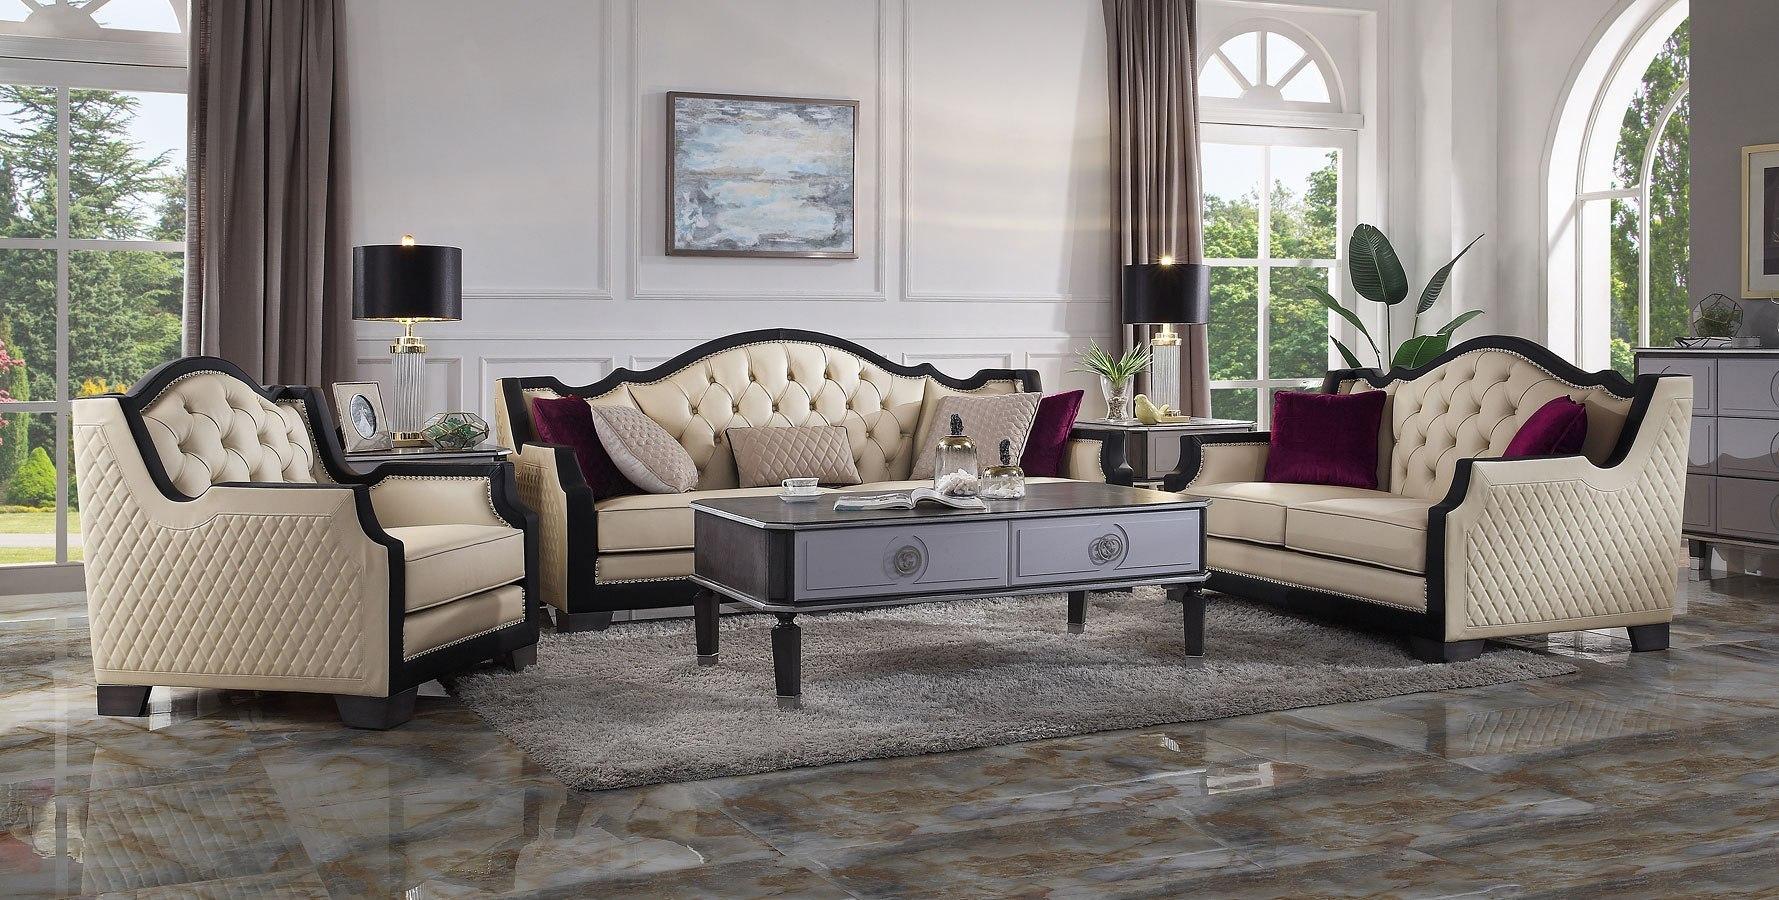 

    
Transitional Beige Living Room Set by Acme House Beatrice 58810-6pcs
